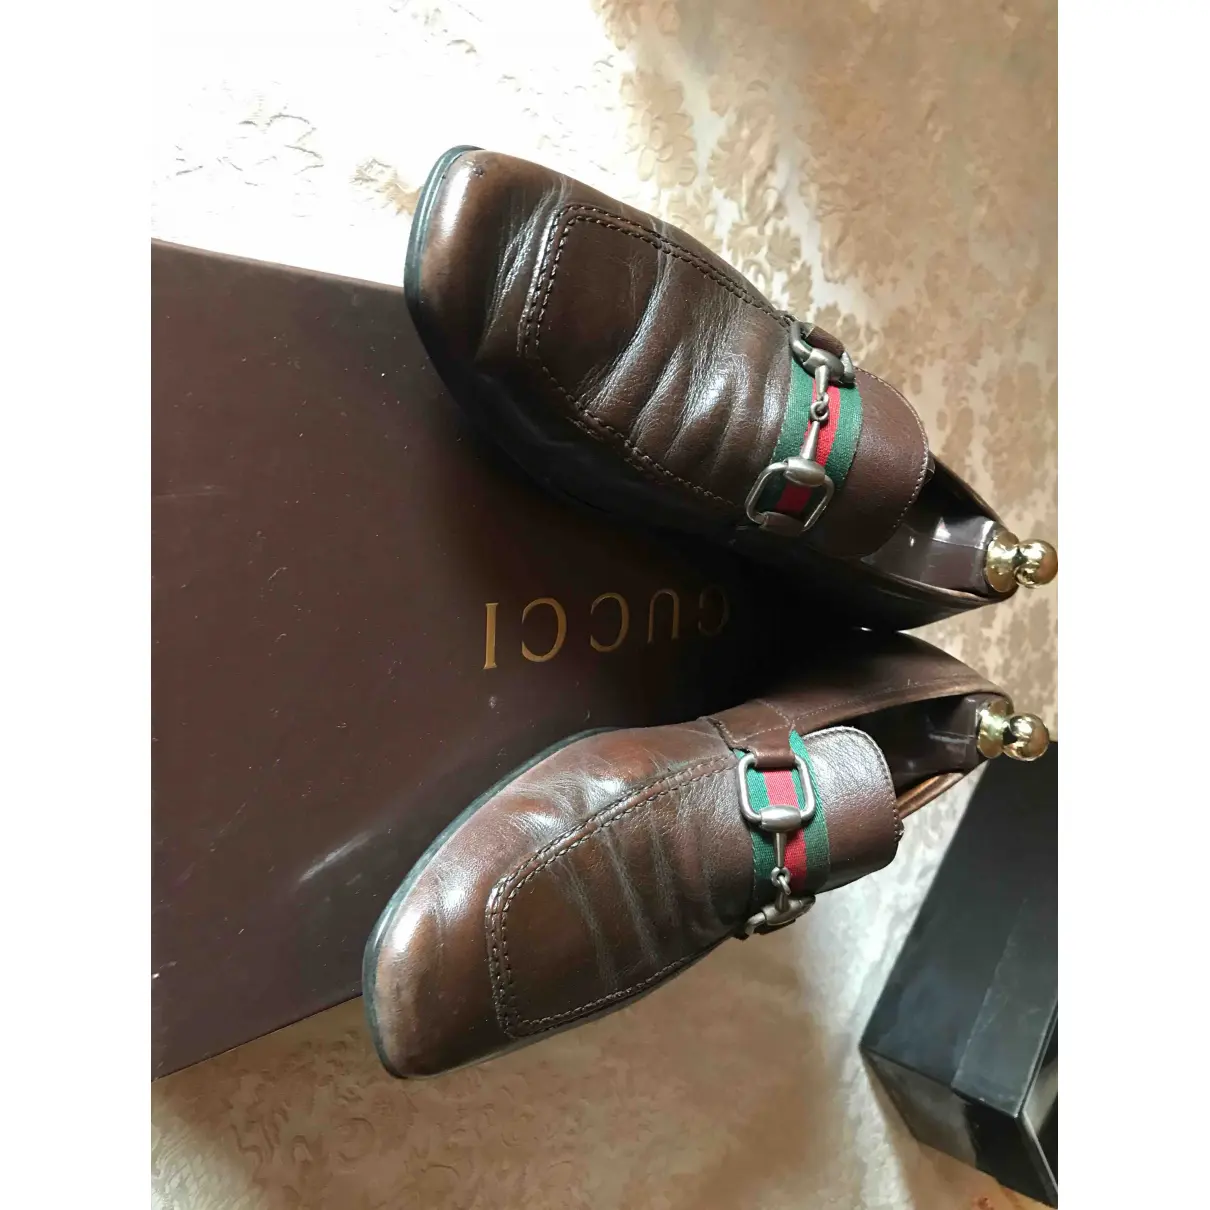 Buy Gucci Leather flats online - Vintage